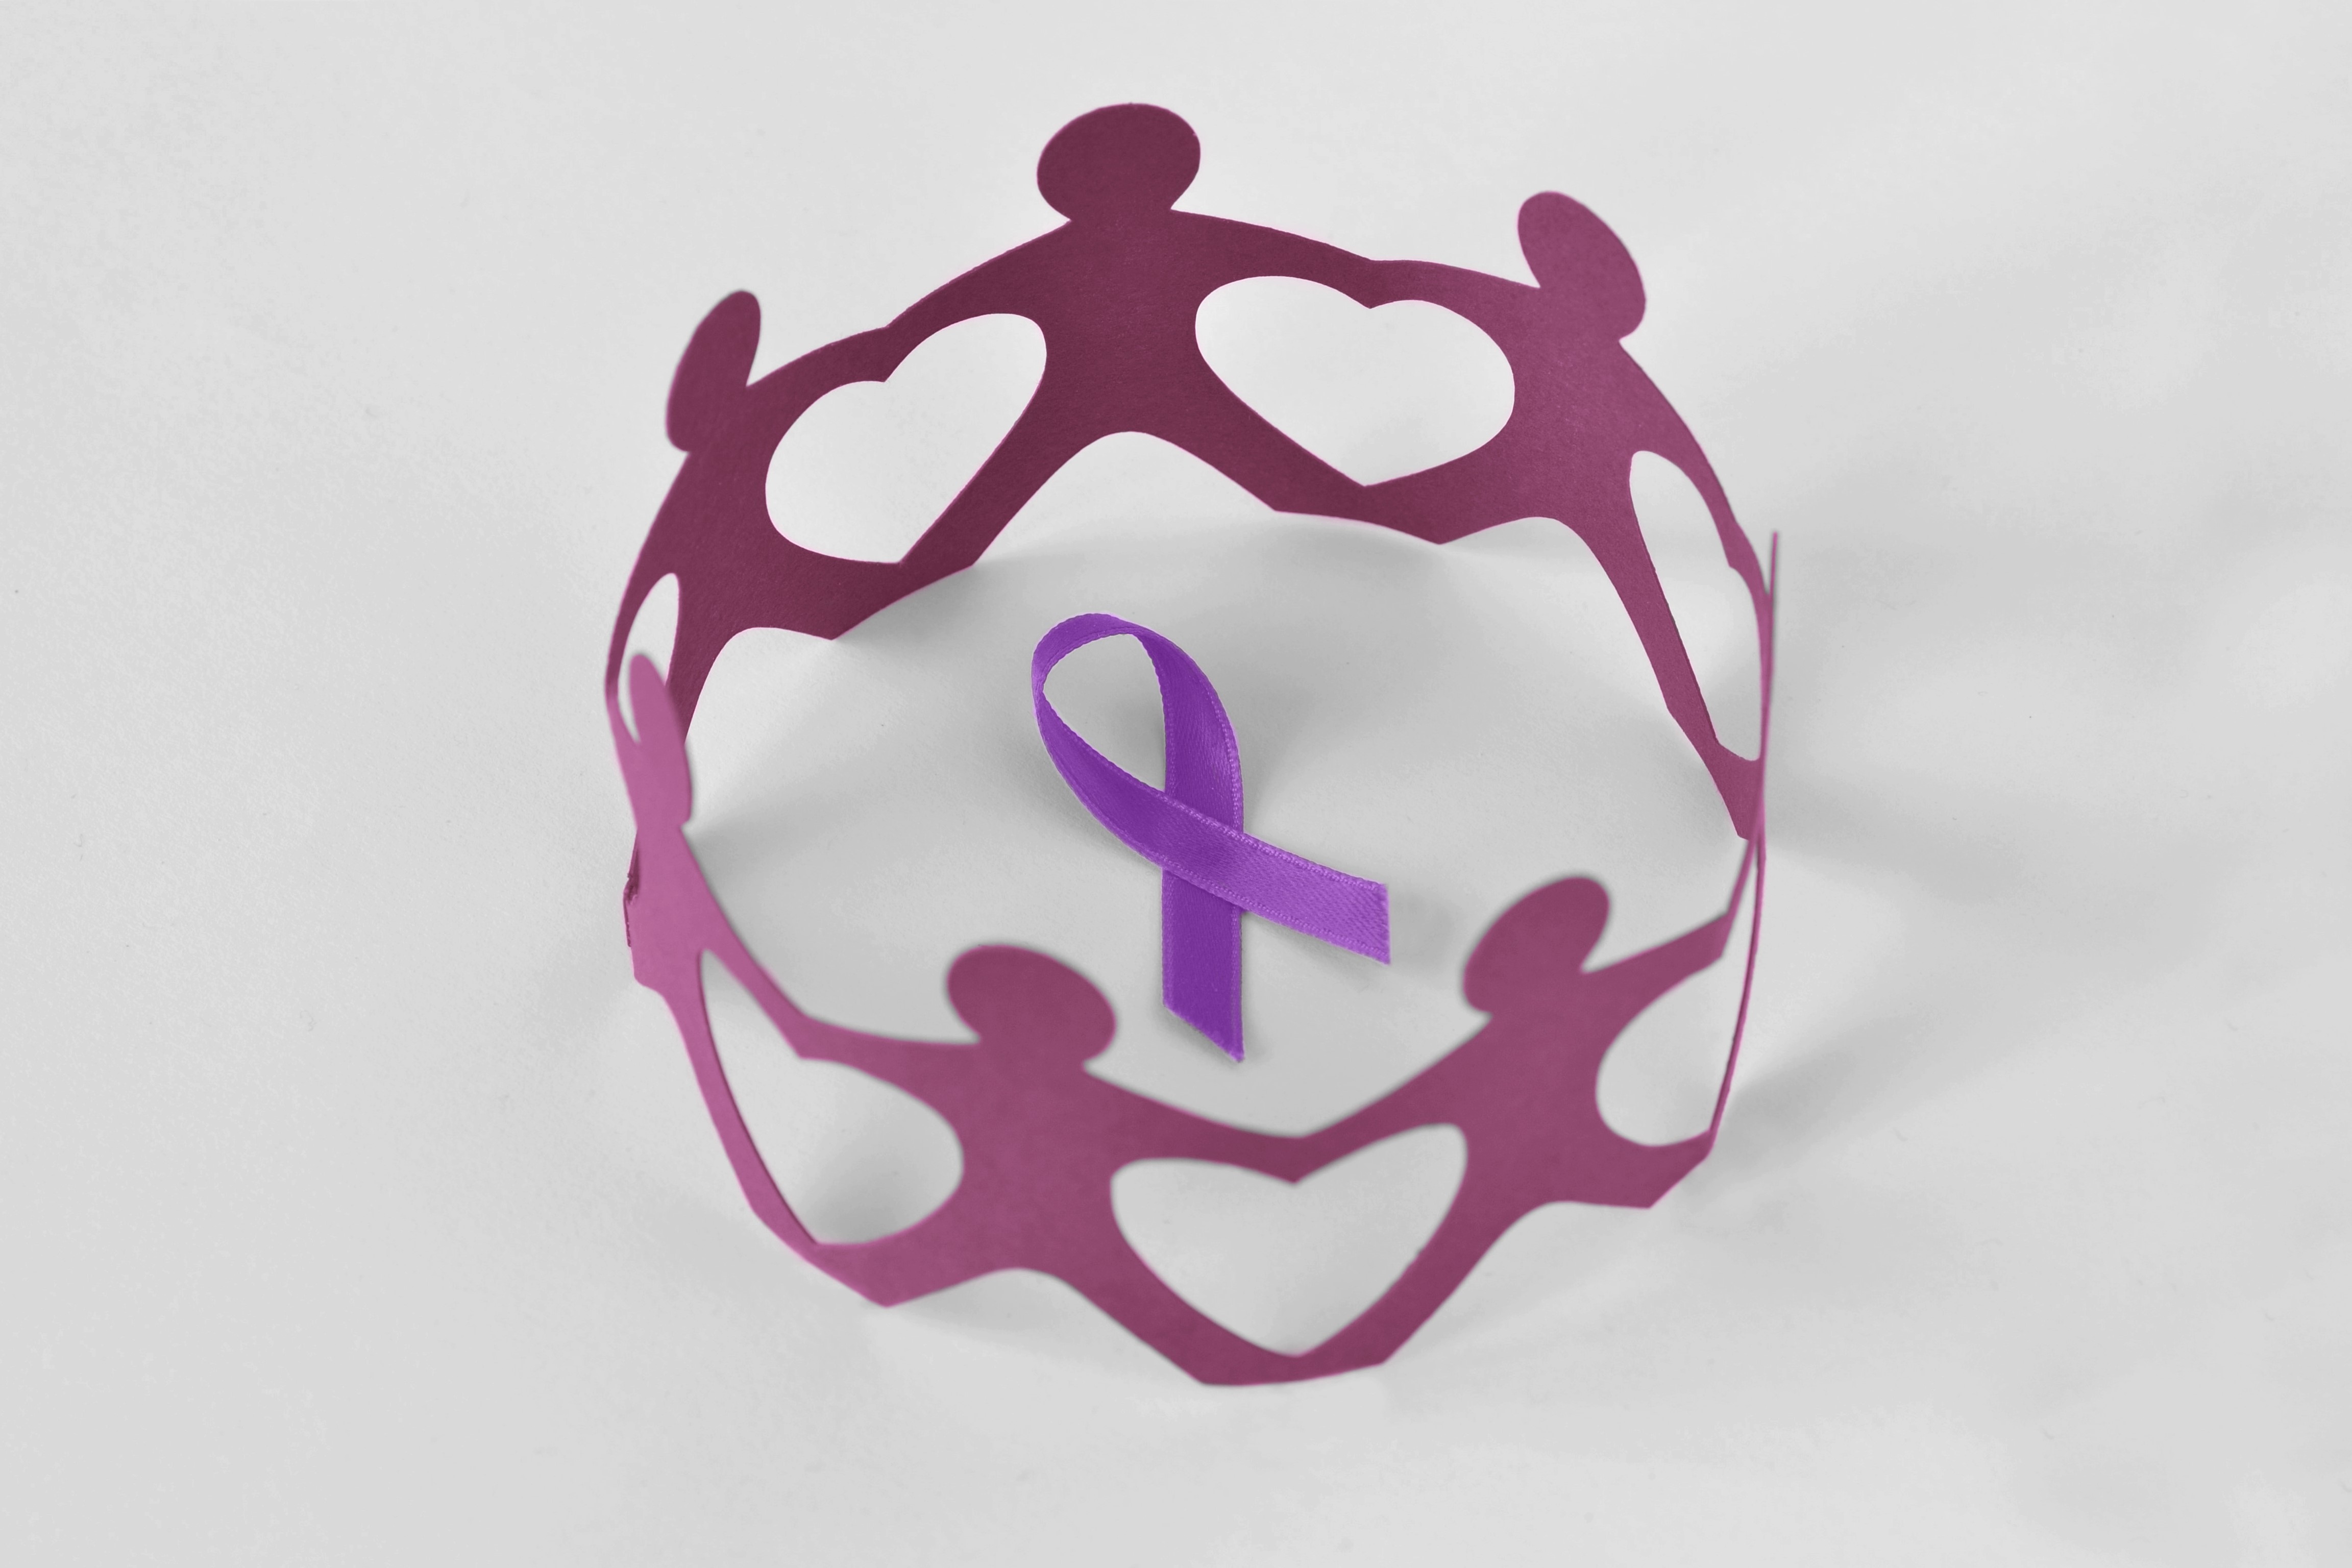 Paper people in a circle around violet ribbon on white background - Concept of Domestic Violence awareness; Alzheimer's disease, Pancreatic cancer, Epilepsy awareness and Hodgkin's Lymphoma